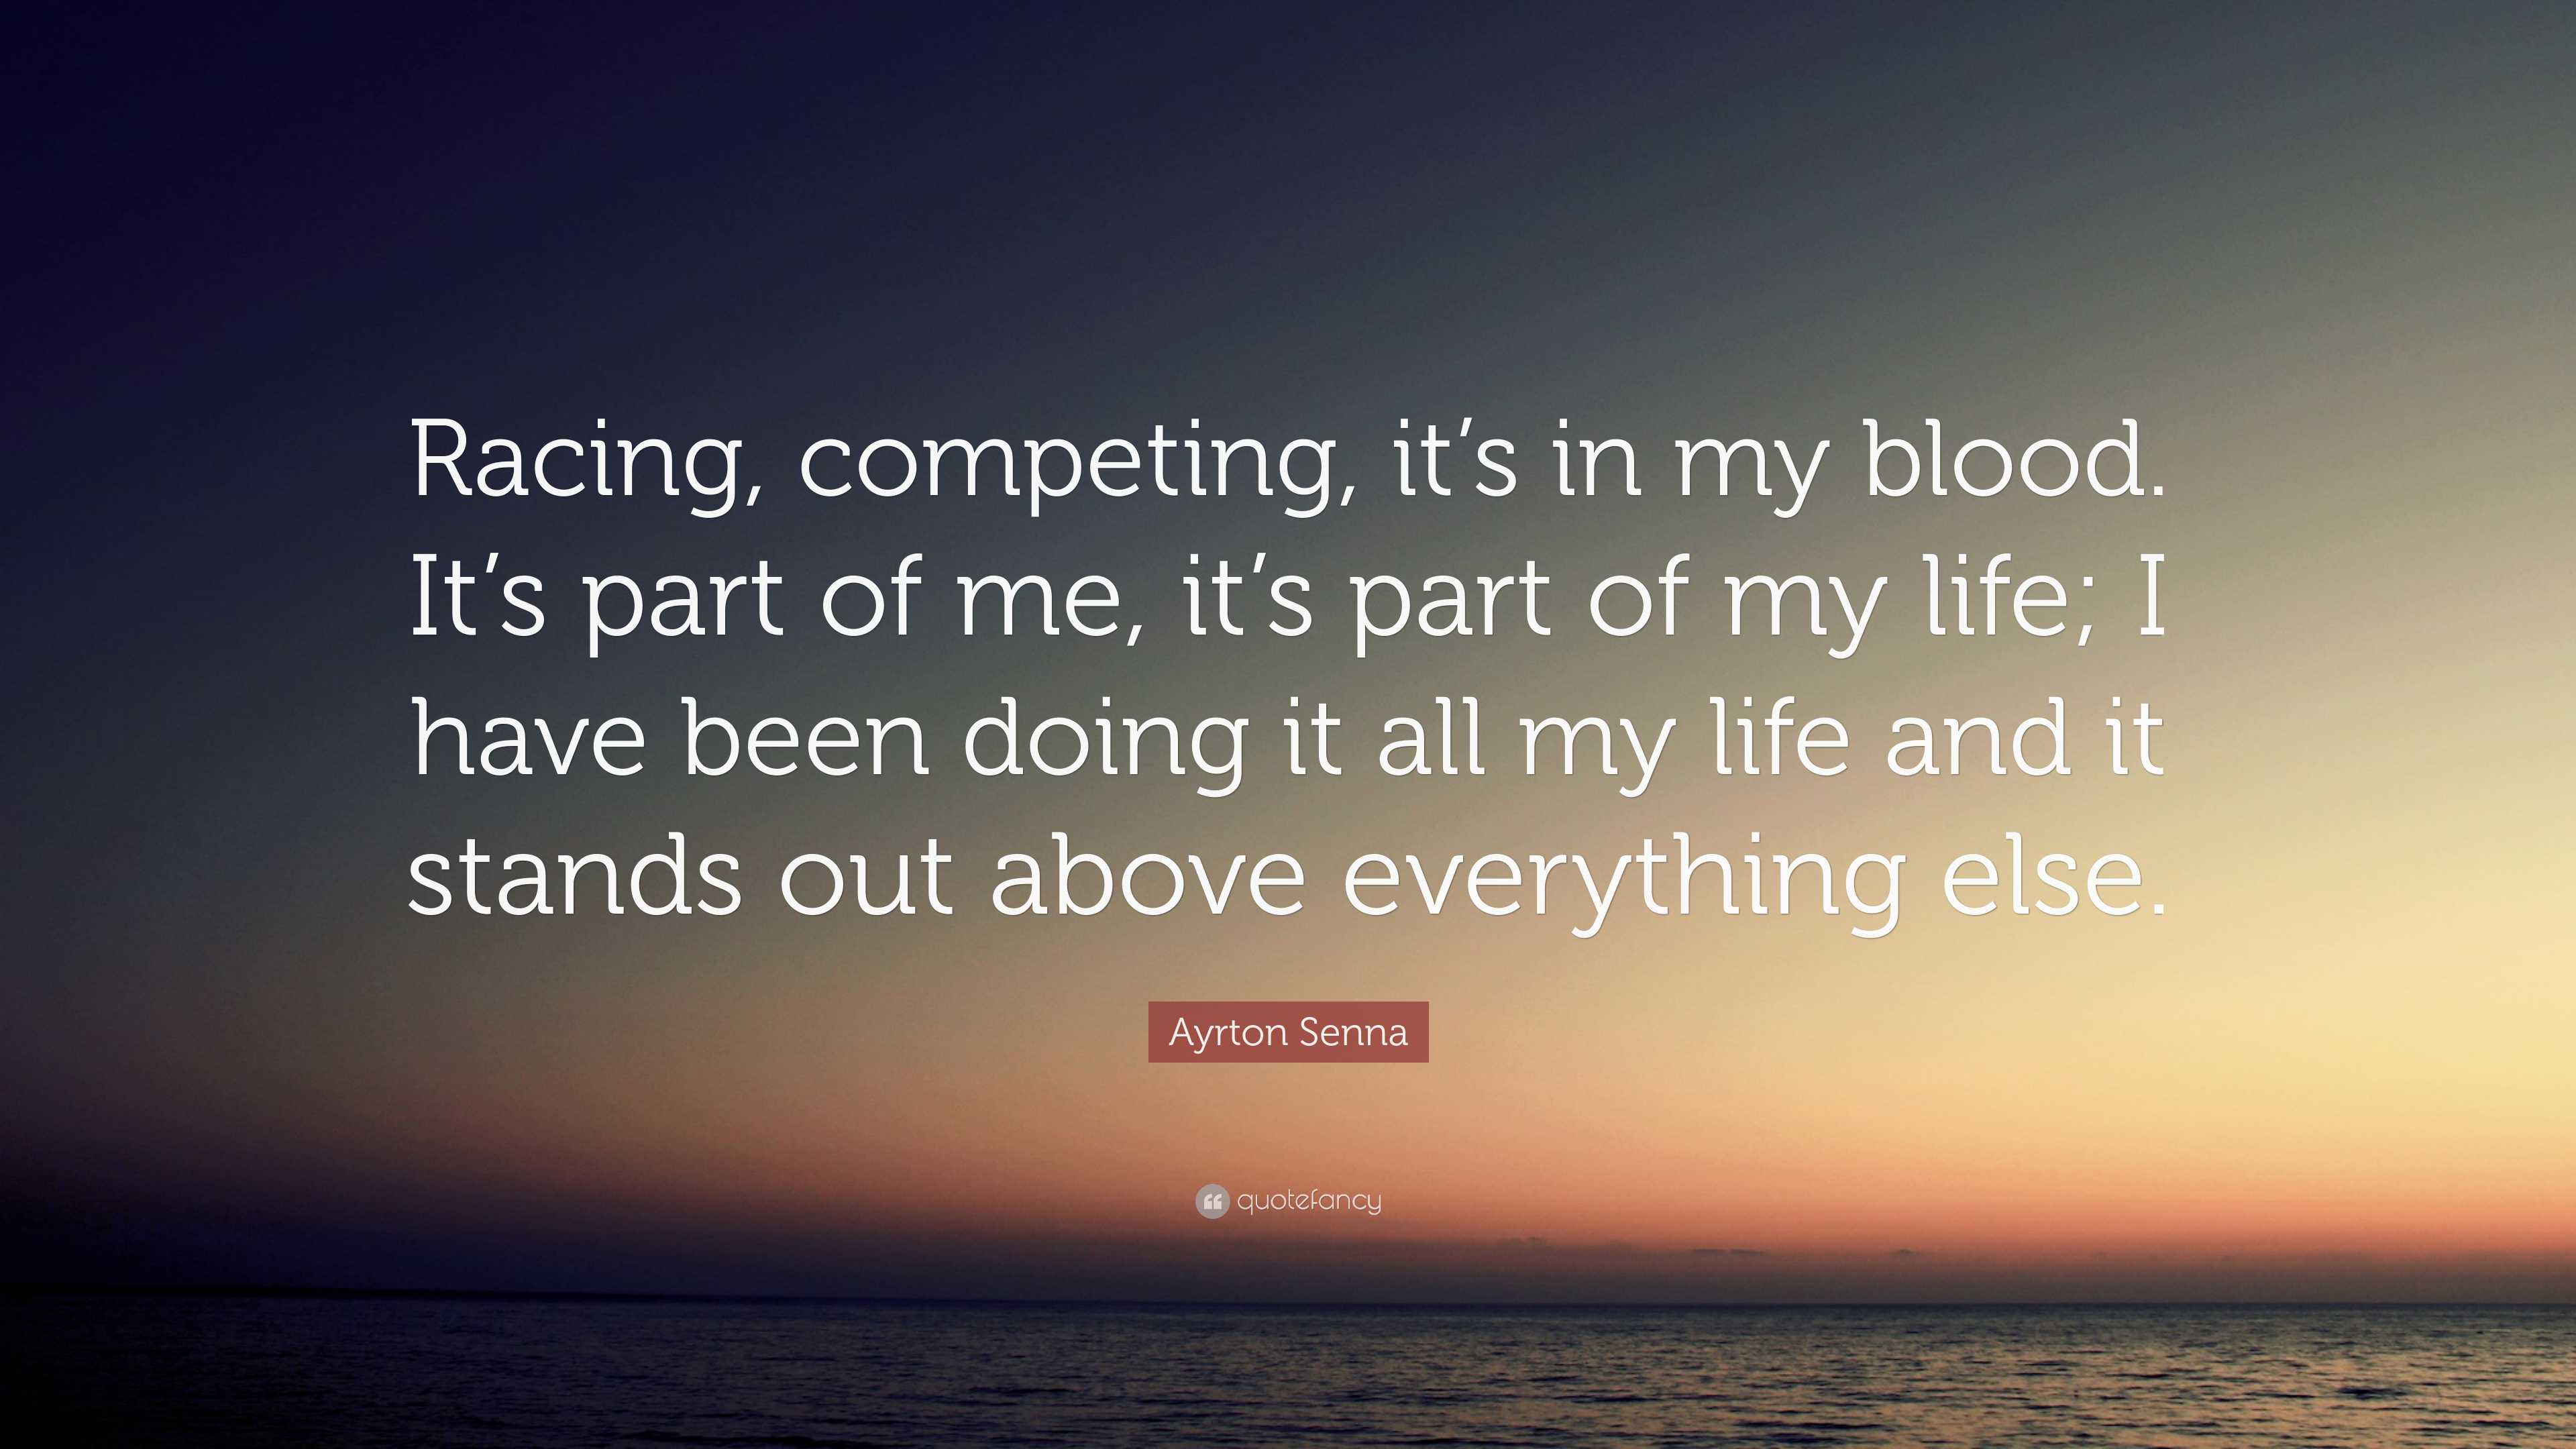 Ayrton Senna Quote: “Racing, competing, it's in my blood. It's